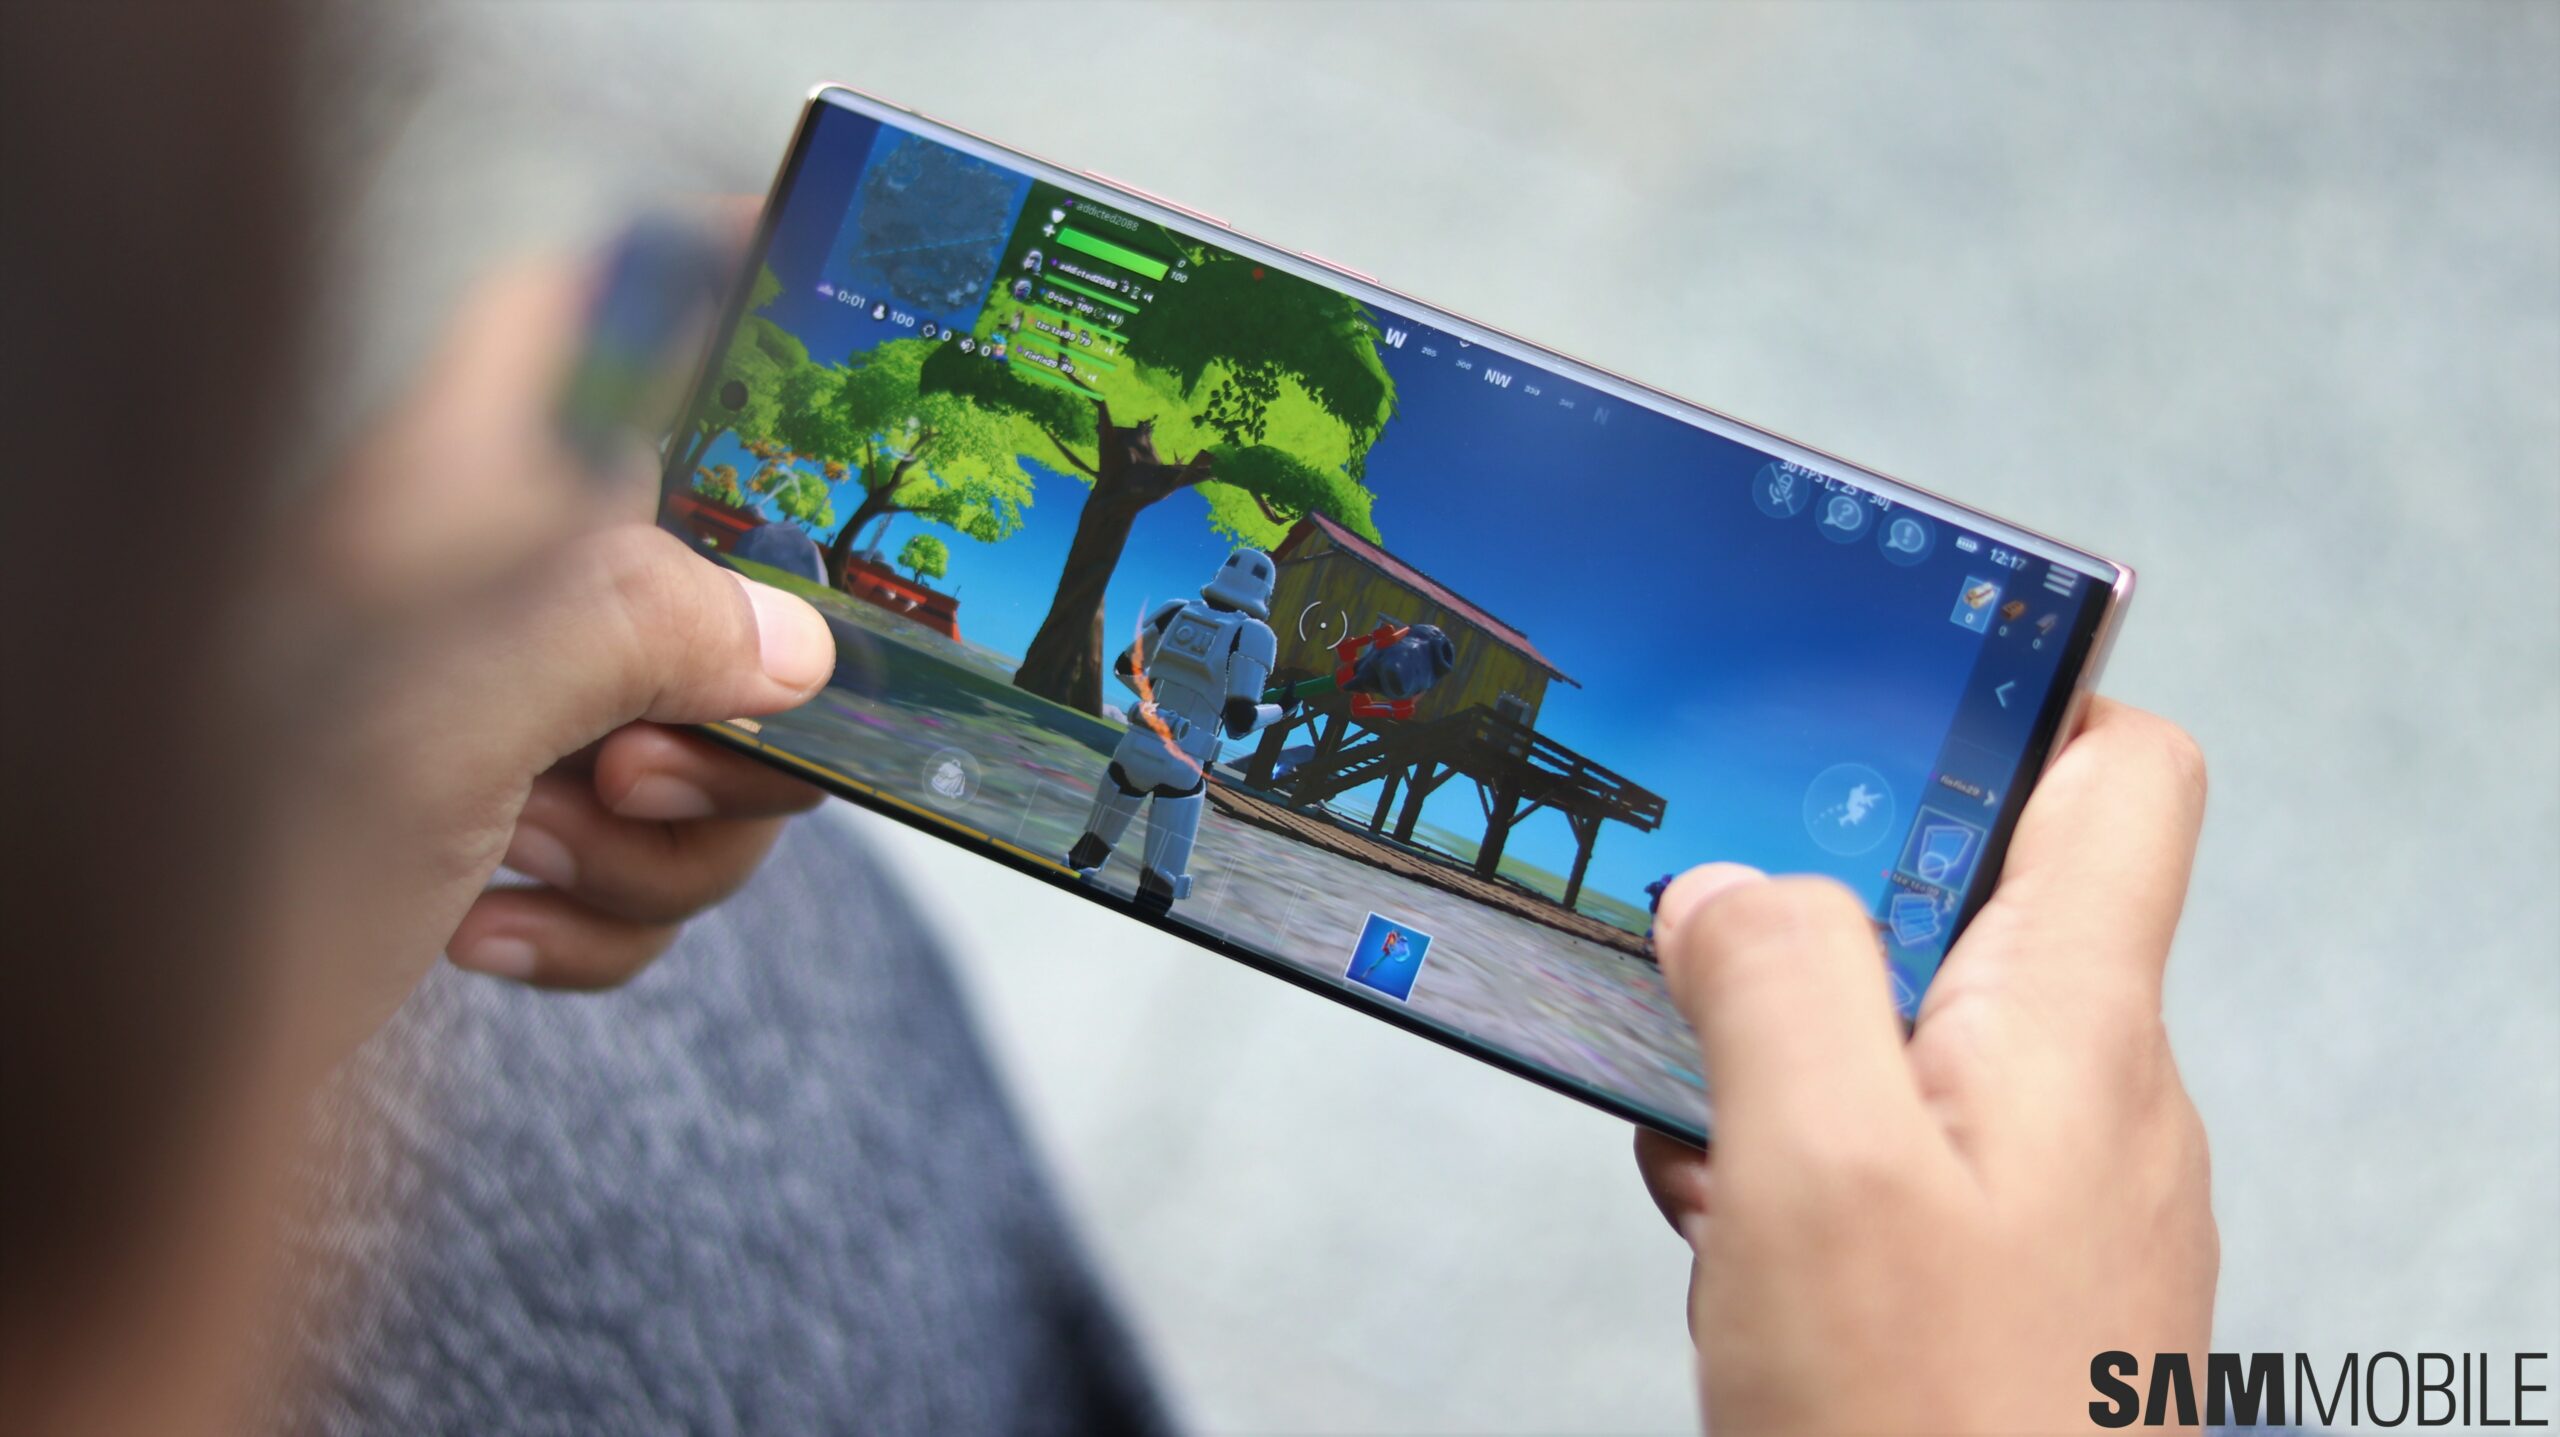 Fortnite is back and free to play on Android with Xbox Cloud